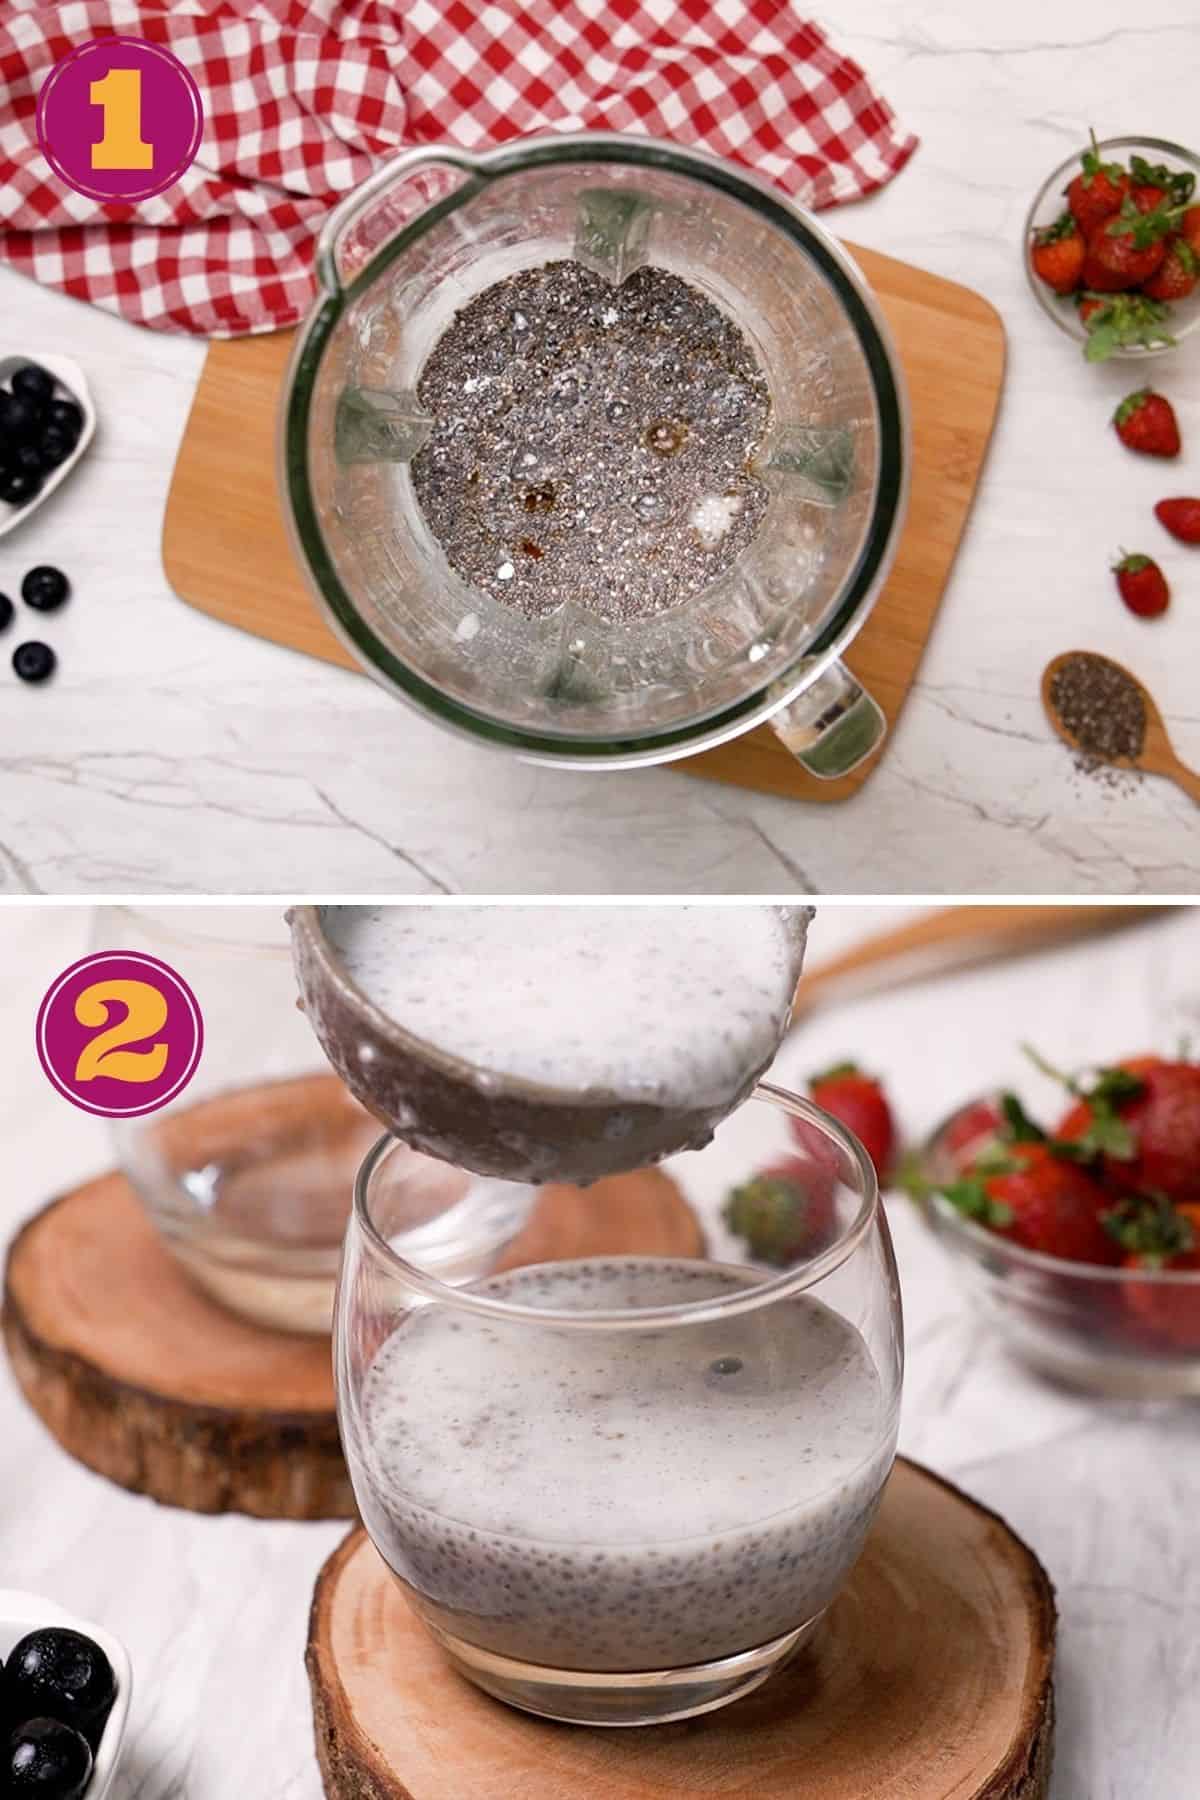 step-by-step instructions for how to make an easy Keto Chia Seed Pudding recipe